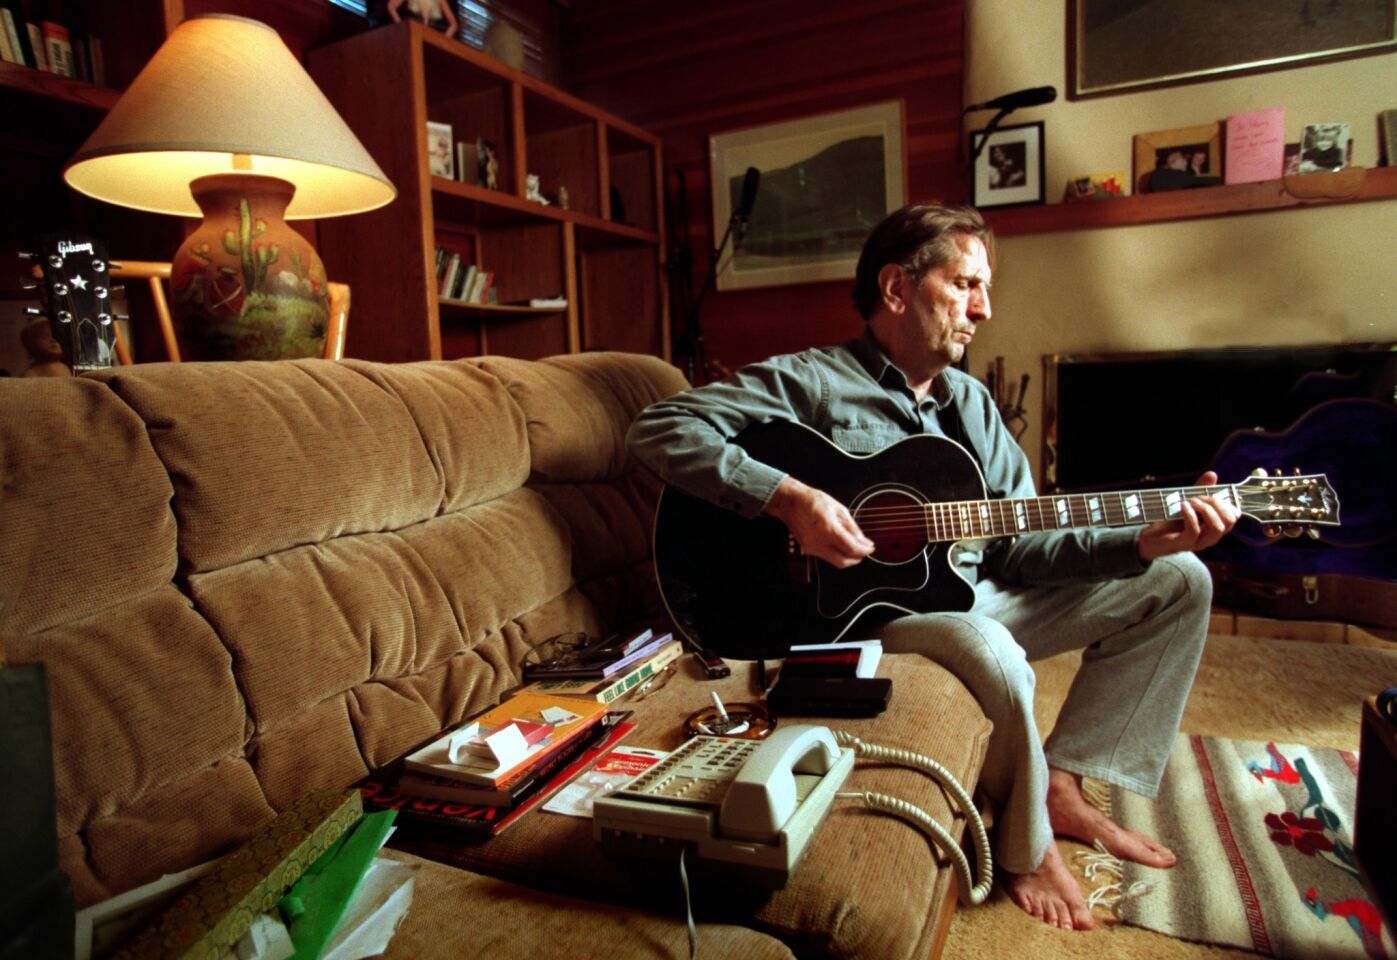 Stanton plays guitar in his home in 1997.